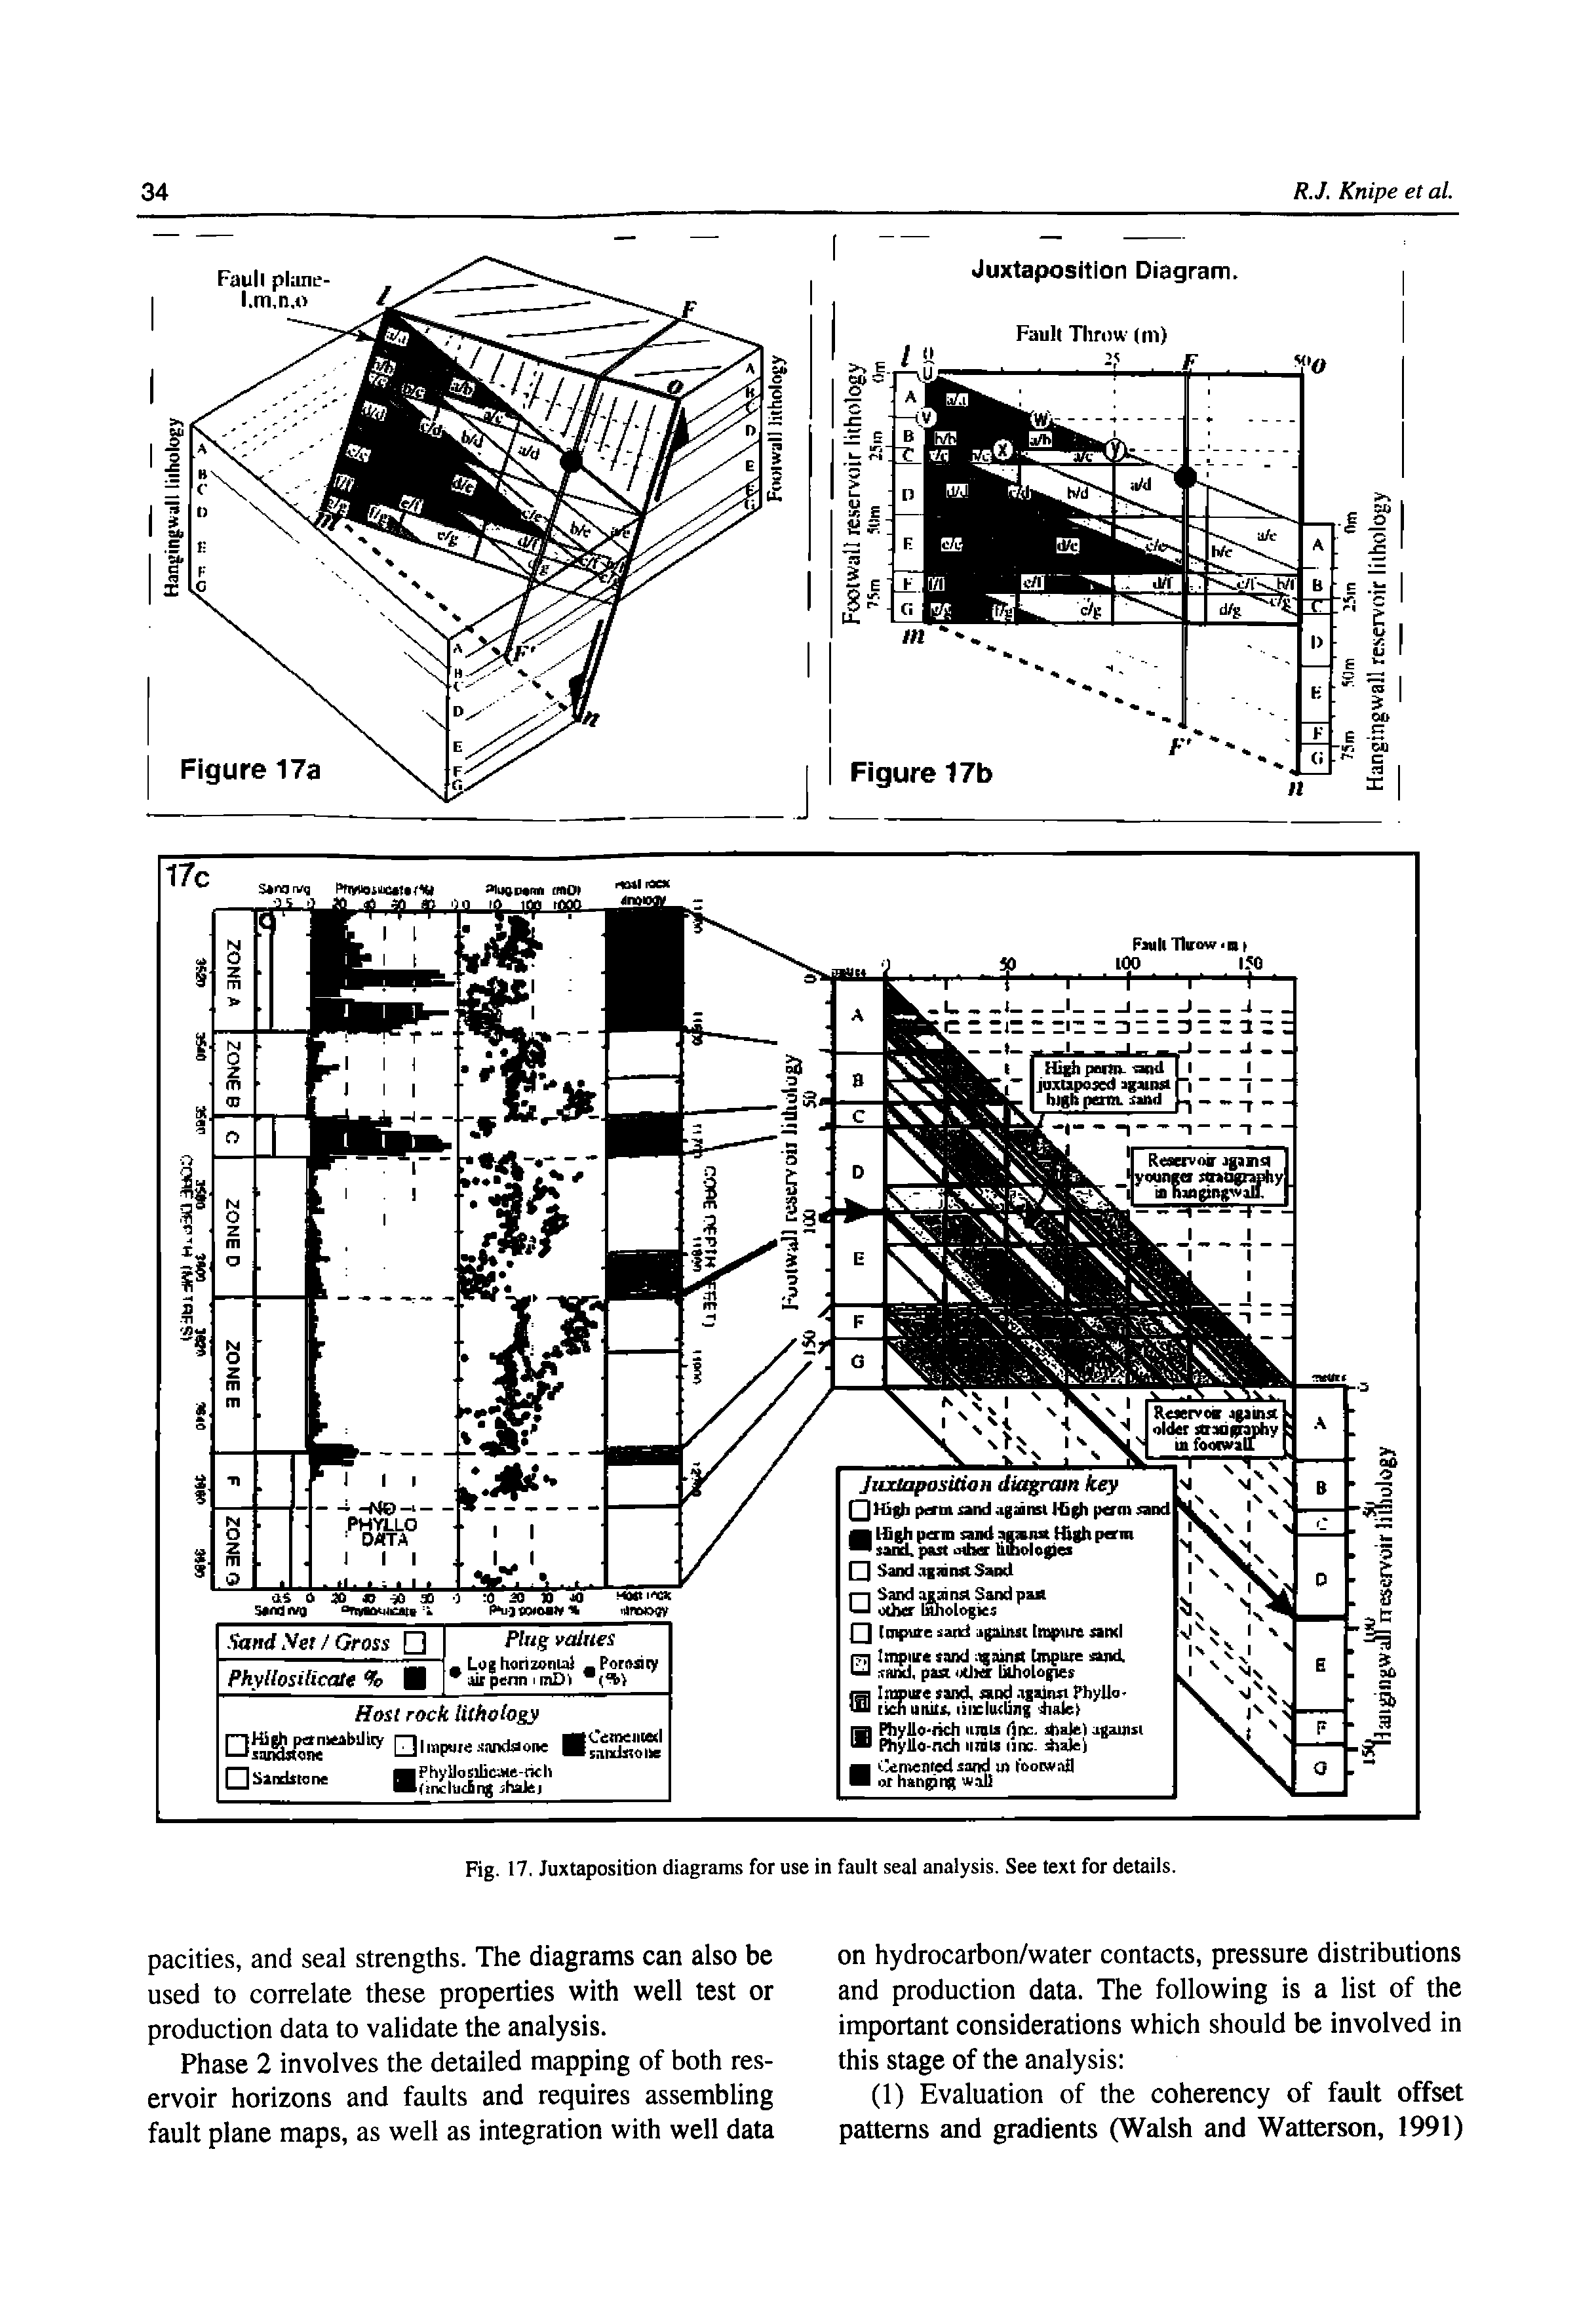 Fig. 17. Juxtaposition diagrams for use in fault seal analysis. See text for details.